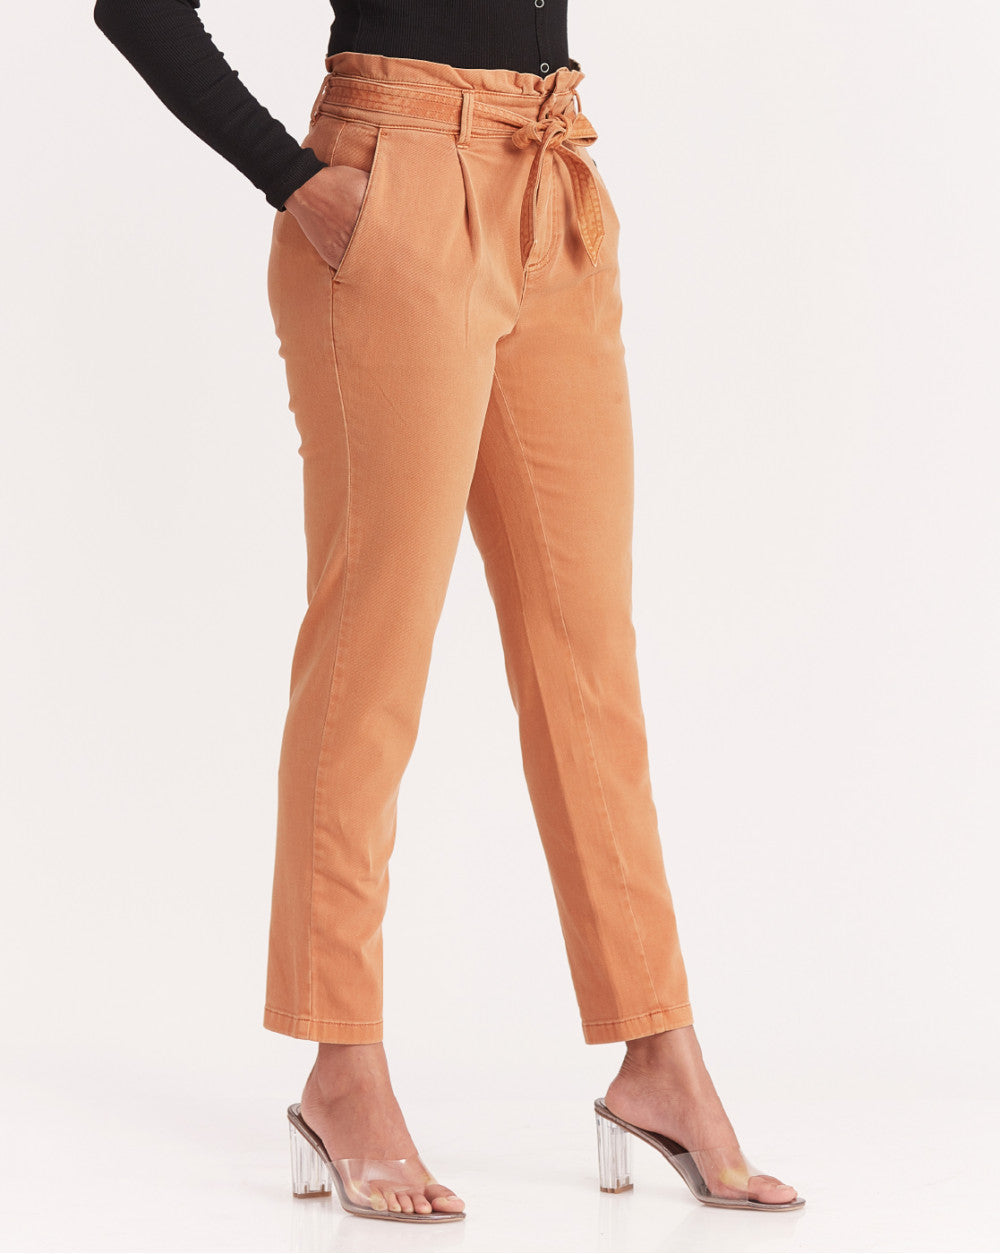 Tapered Fit Juan Tapered Garment-Dyed Pants - Almond Brown